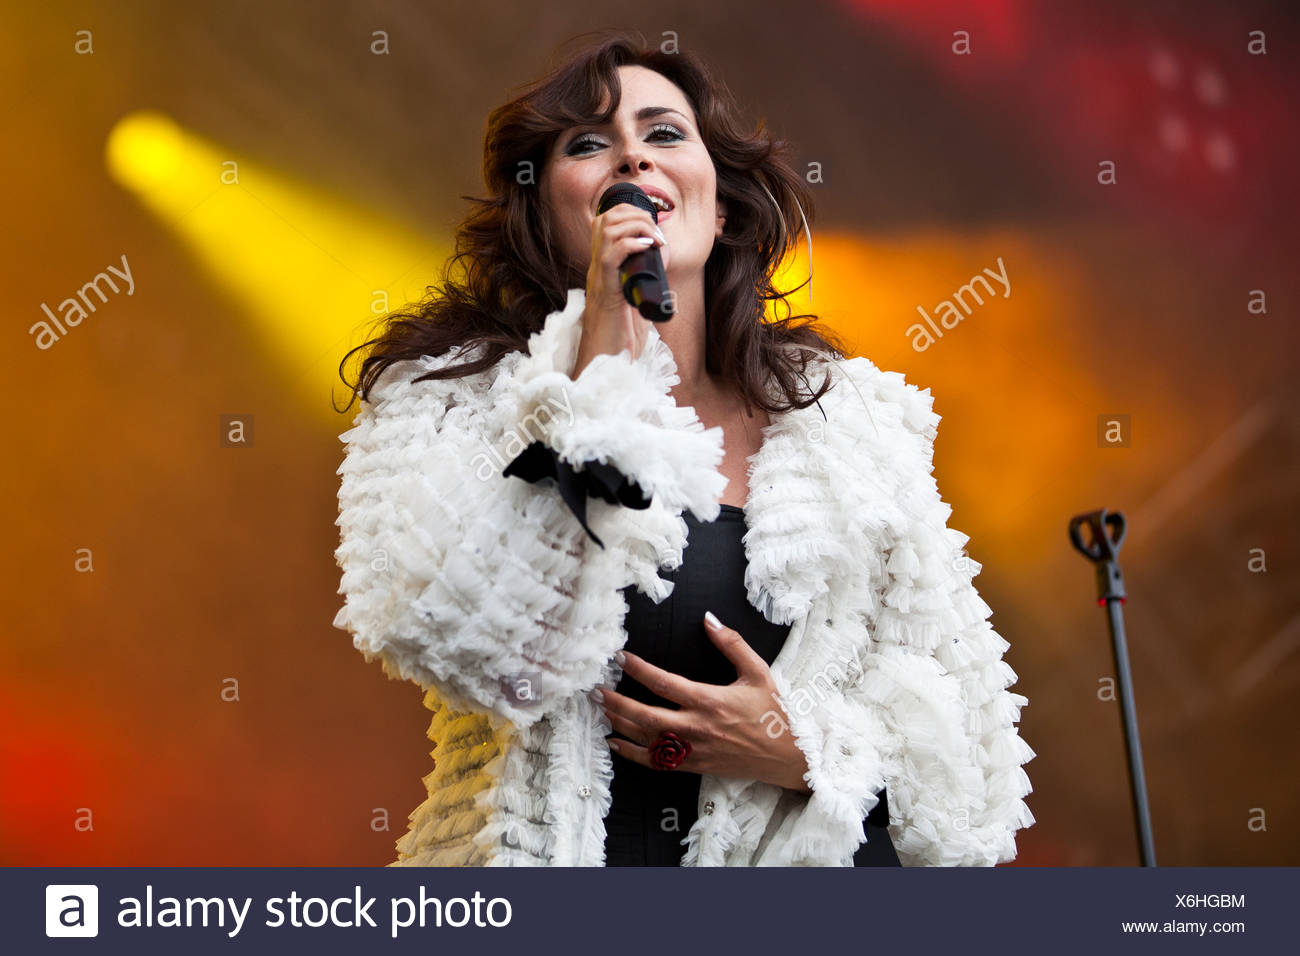 Singer And Frontwoman Sharon Den Adel Of The Dutch Symphonic Metal Band Within Temptation Performing Live At The Heitere Open Stock Photo Alamy